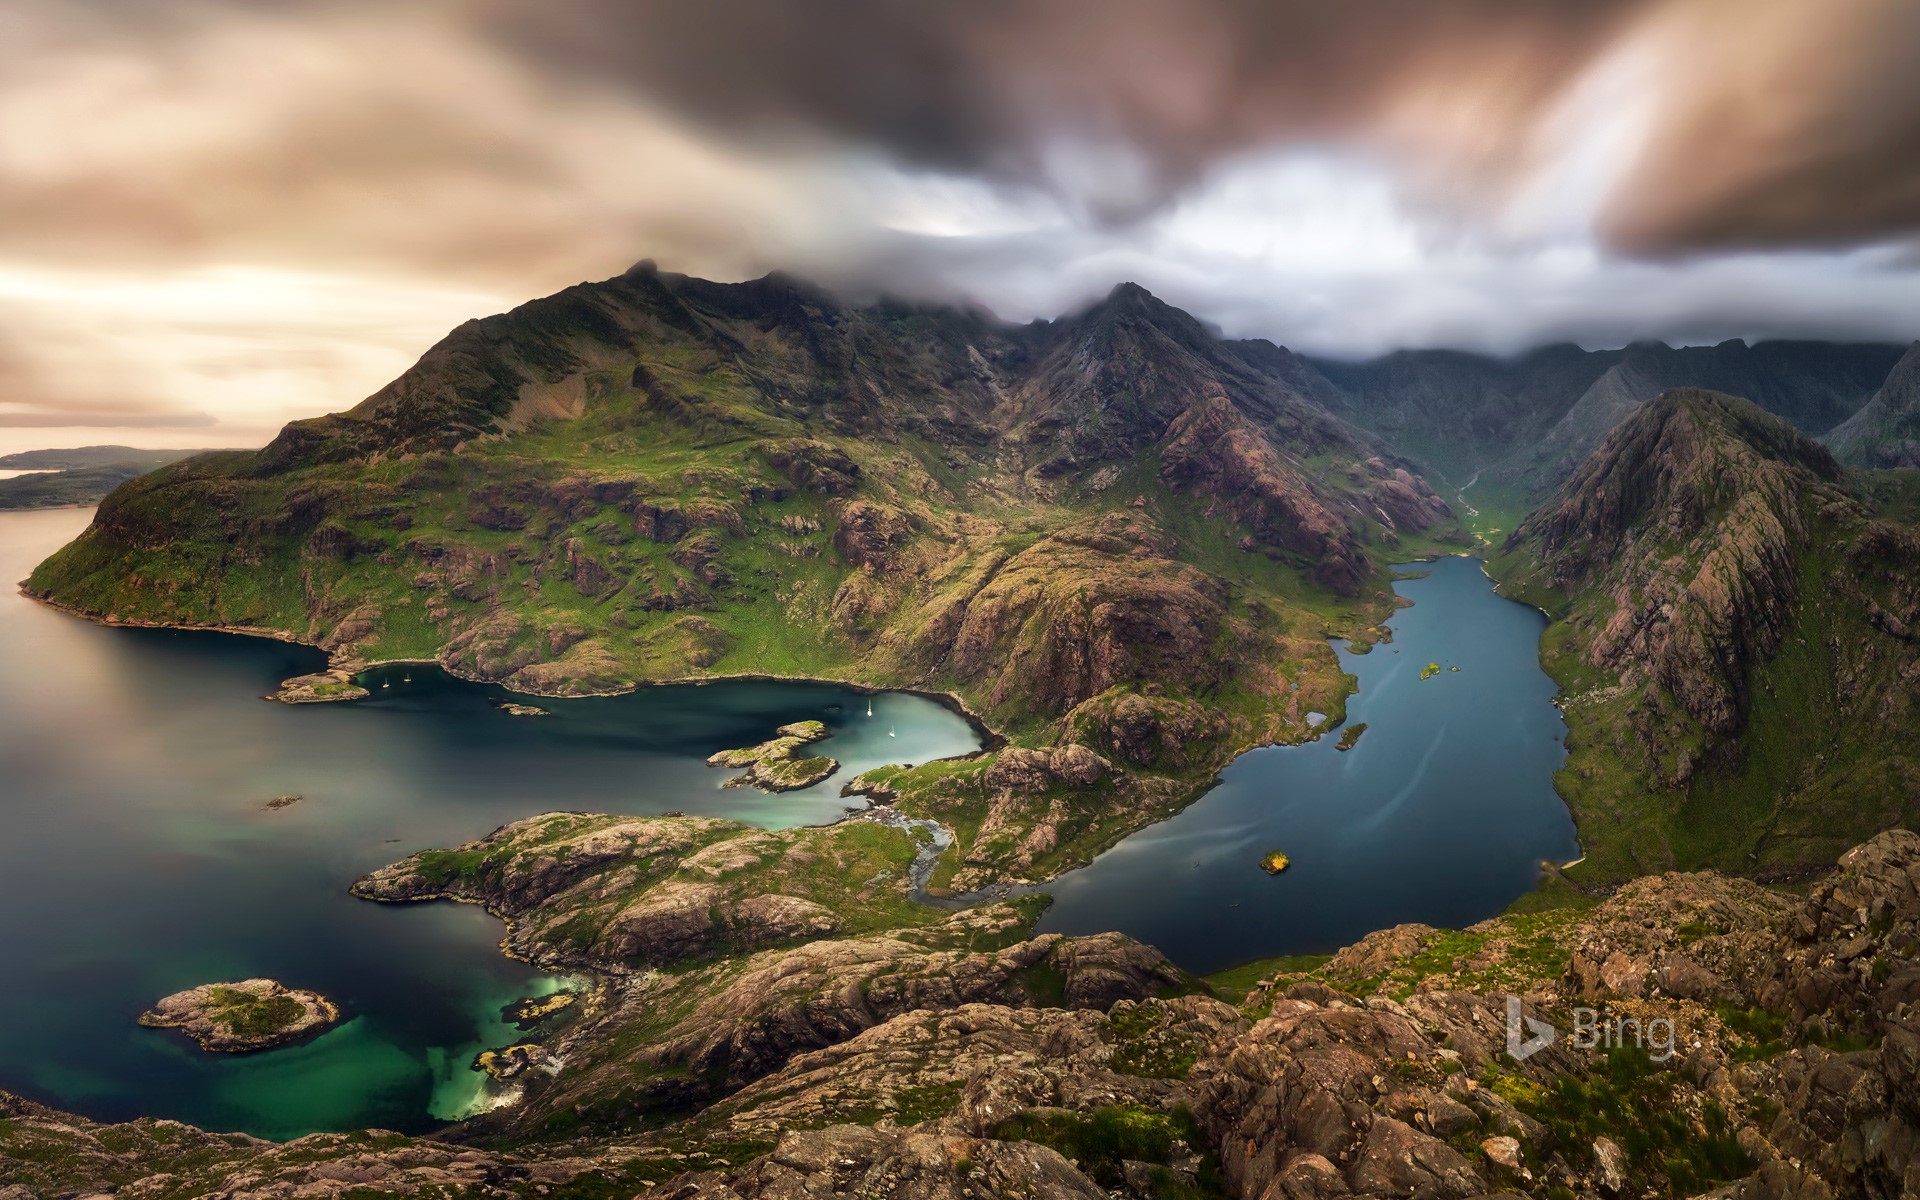 Loch na Cuilce and Loch Coruisk with the Black Cuillin in the background, Isle of Skye, Scotland